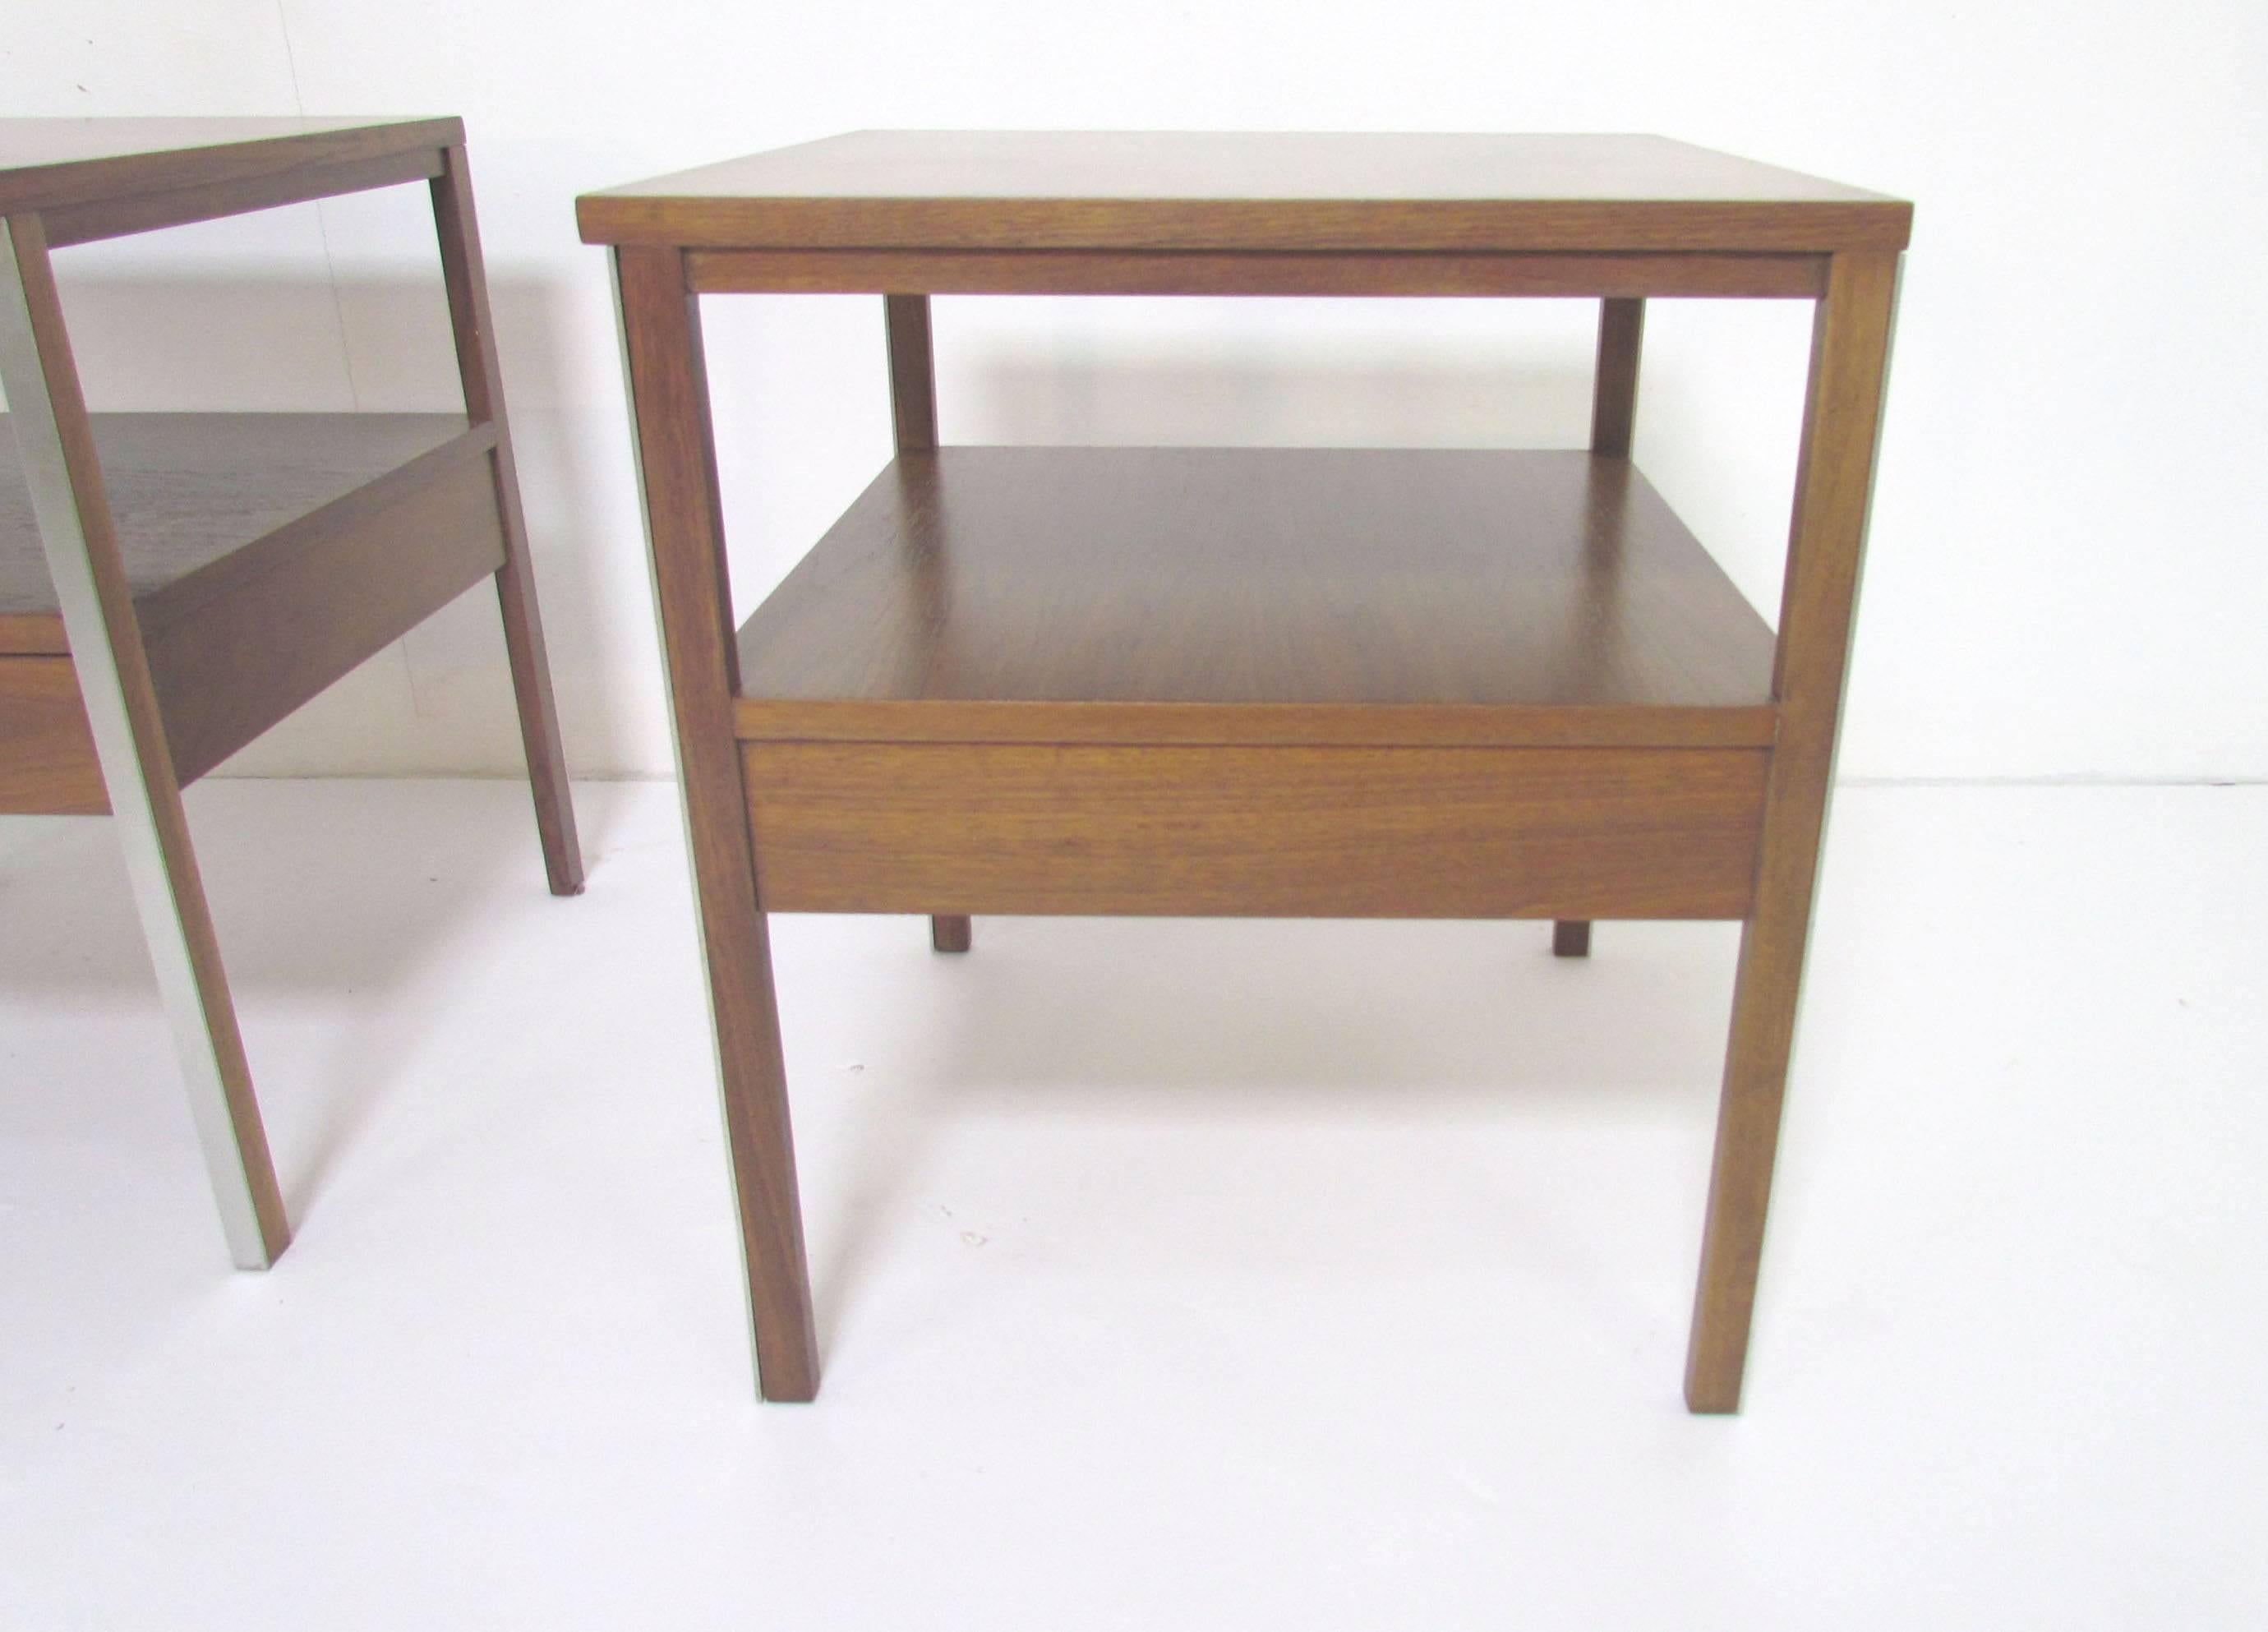 Aluminum Pair of End Tables or Nightstands by Paul McCobb for Calvin, circa 1950s